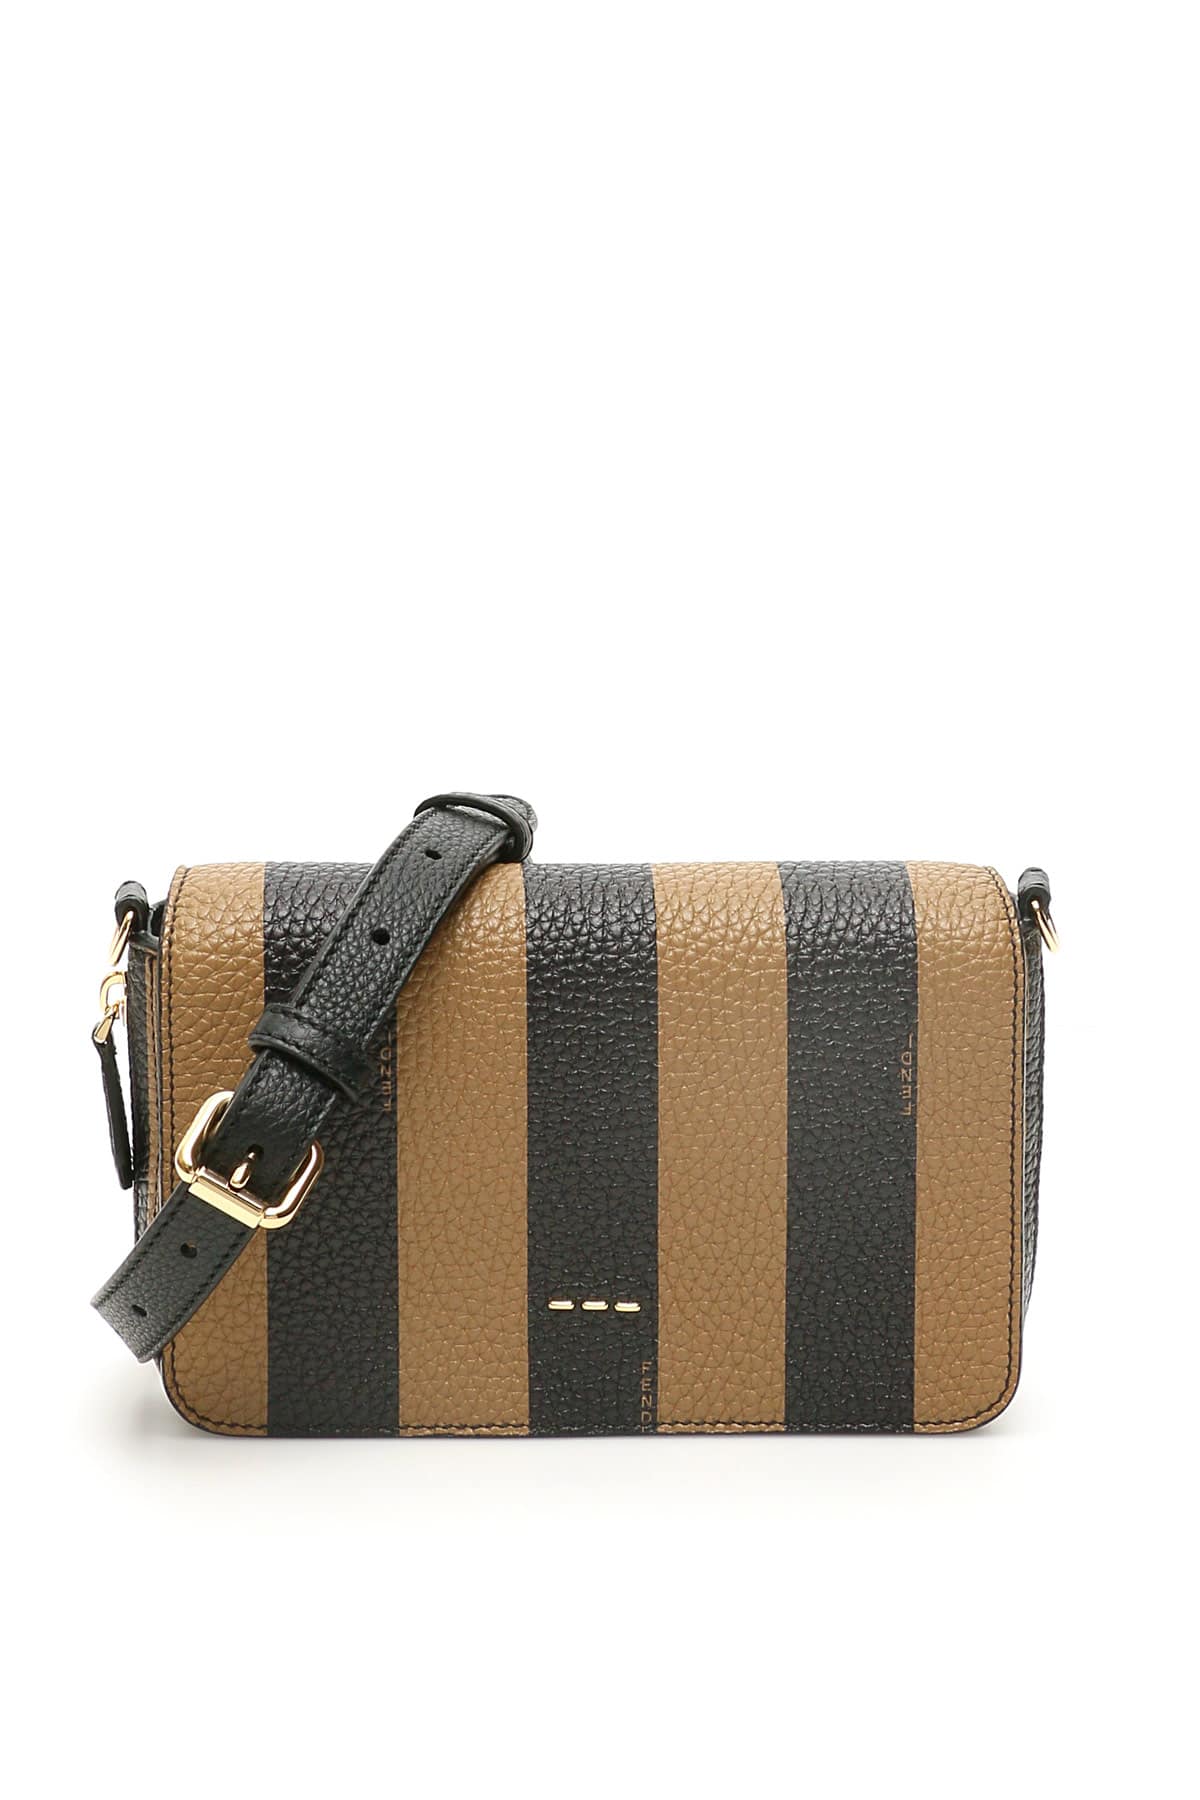 Fendi Pequin-striped mini bag in grained leather with all-over micro logo print. It is expandable wi